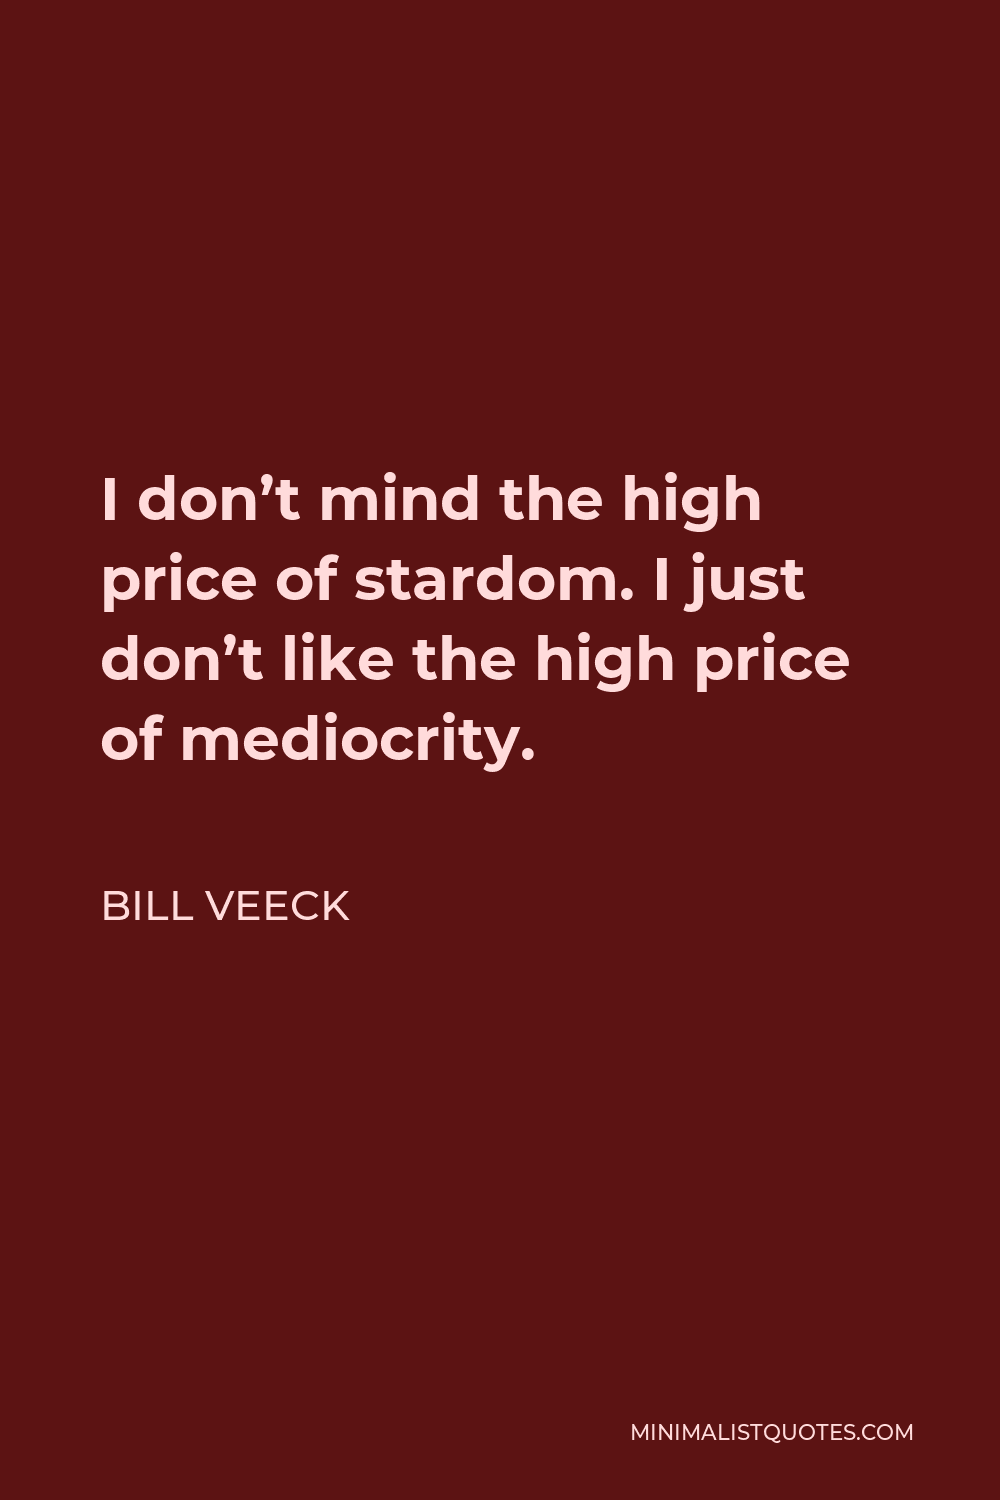 Bill Veeck Quote - I don’t mind the high price of stardom. I just don’t like the high price of mediocrity.